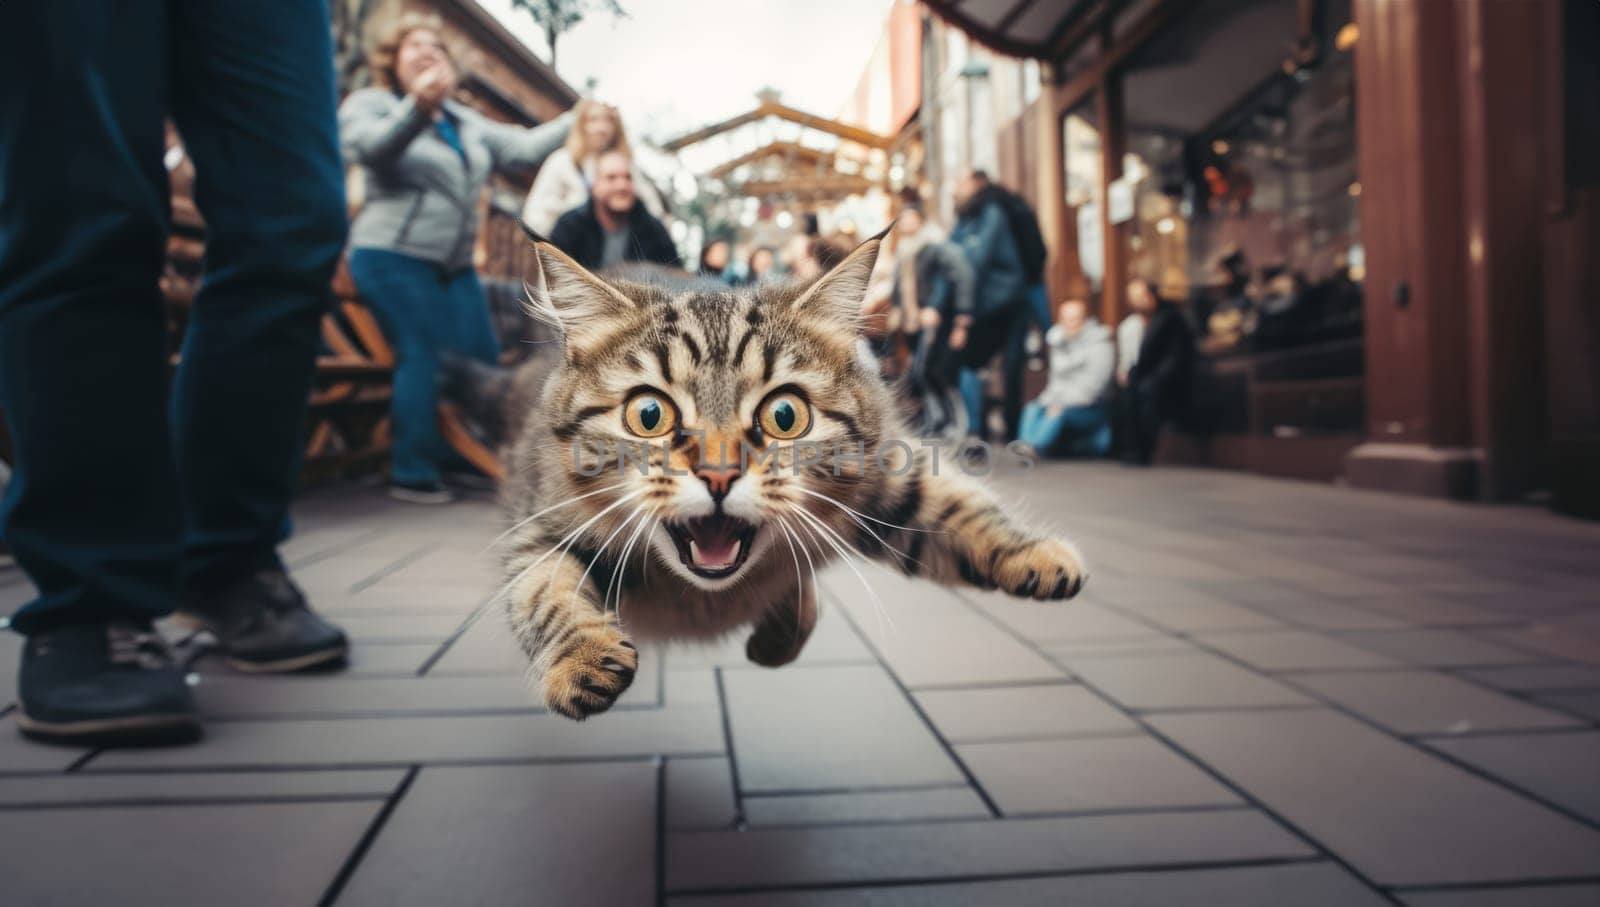 A close-up photograph captures a cat dashing through the urban streets with agility and speed, amidst the bustling cityscape by dotshock